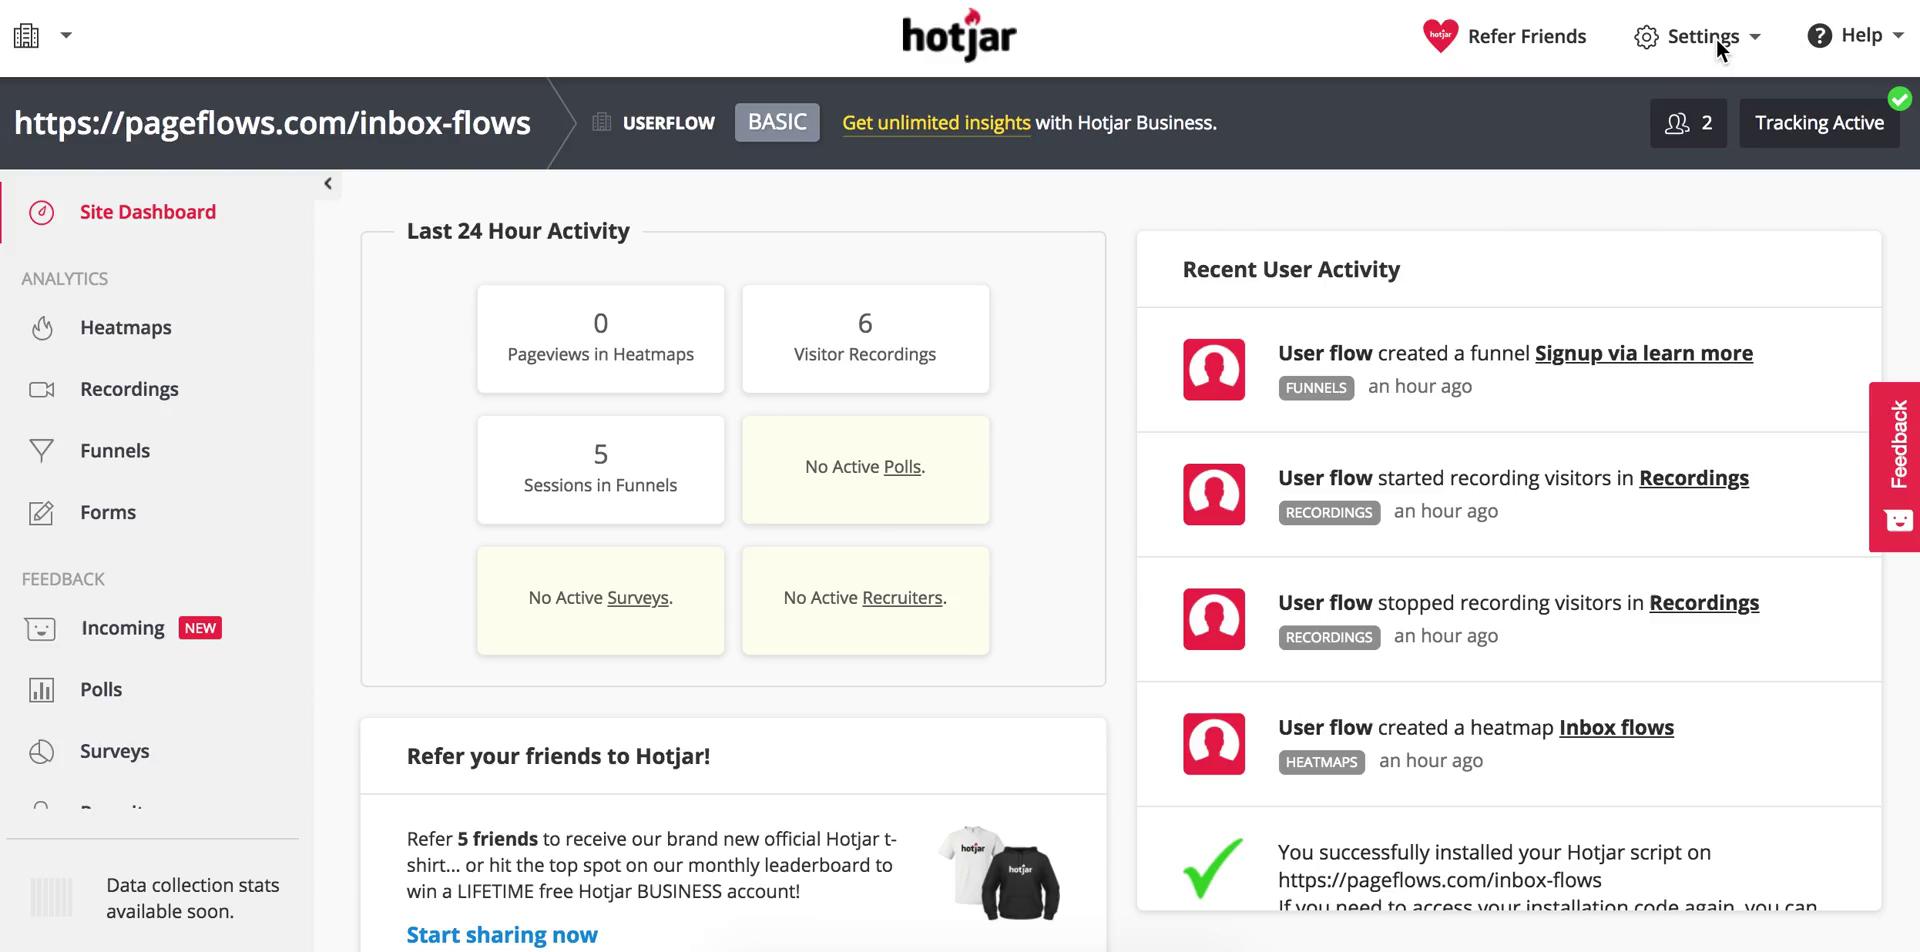 Screenshot of on Deleting your account on Hotjar user flow